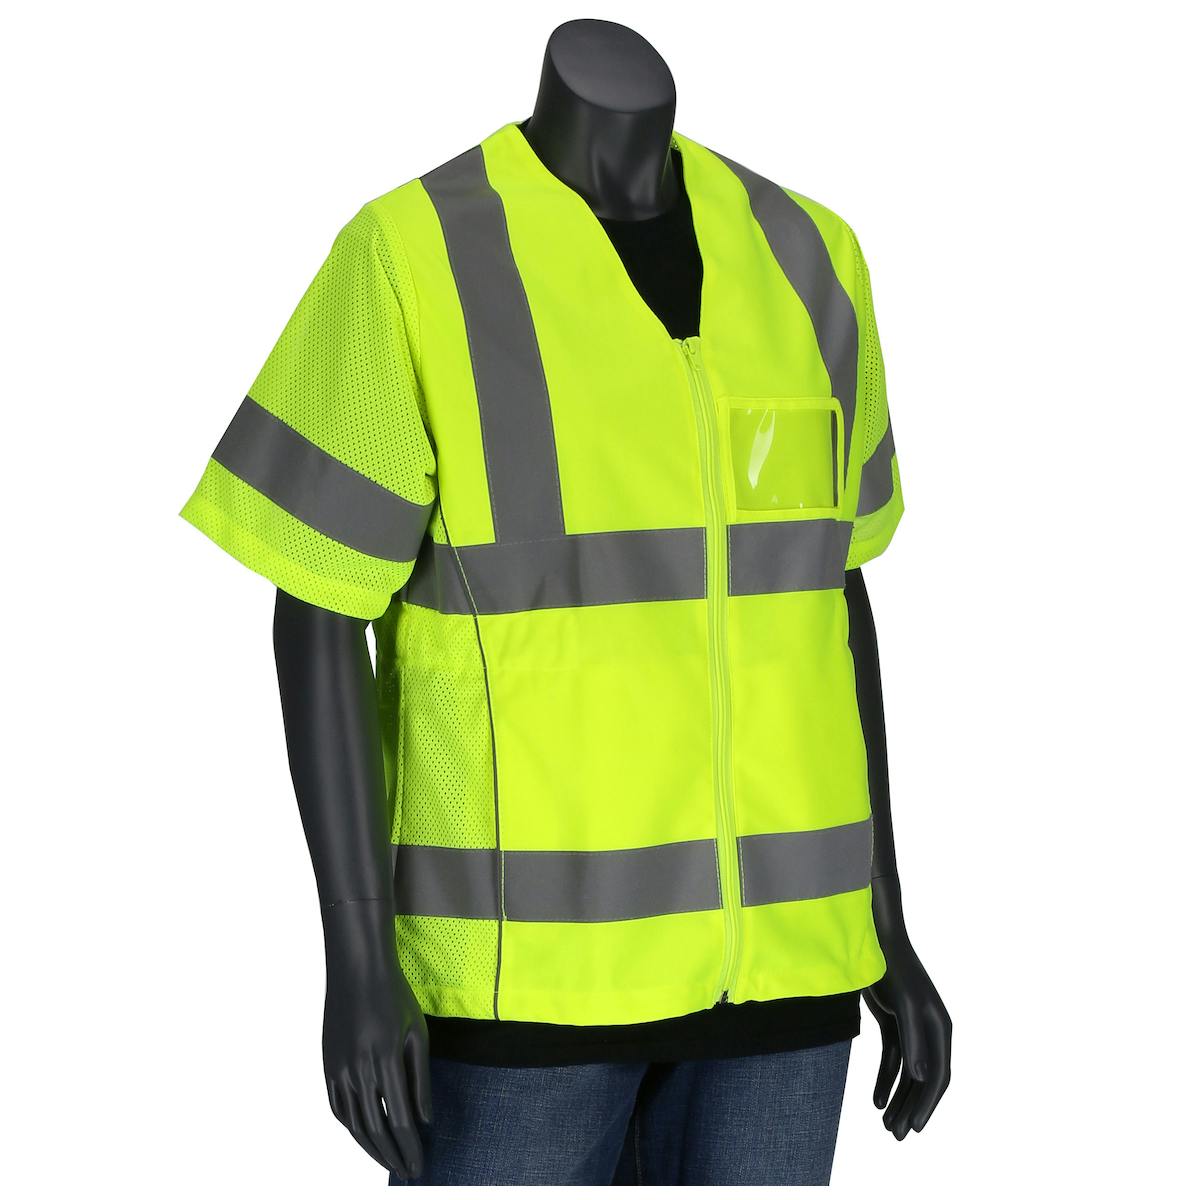 ANSI Type R Class 3 Women's Contoured Vest with Solid Front, Mesh Back and Adjustable Waist, Hi-Vis Yellow (303-0313)_1